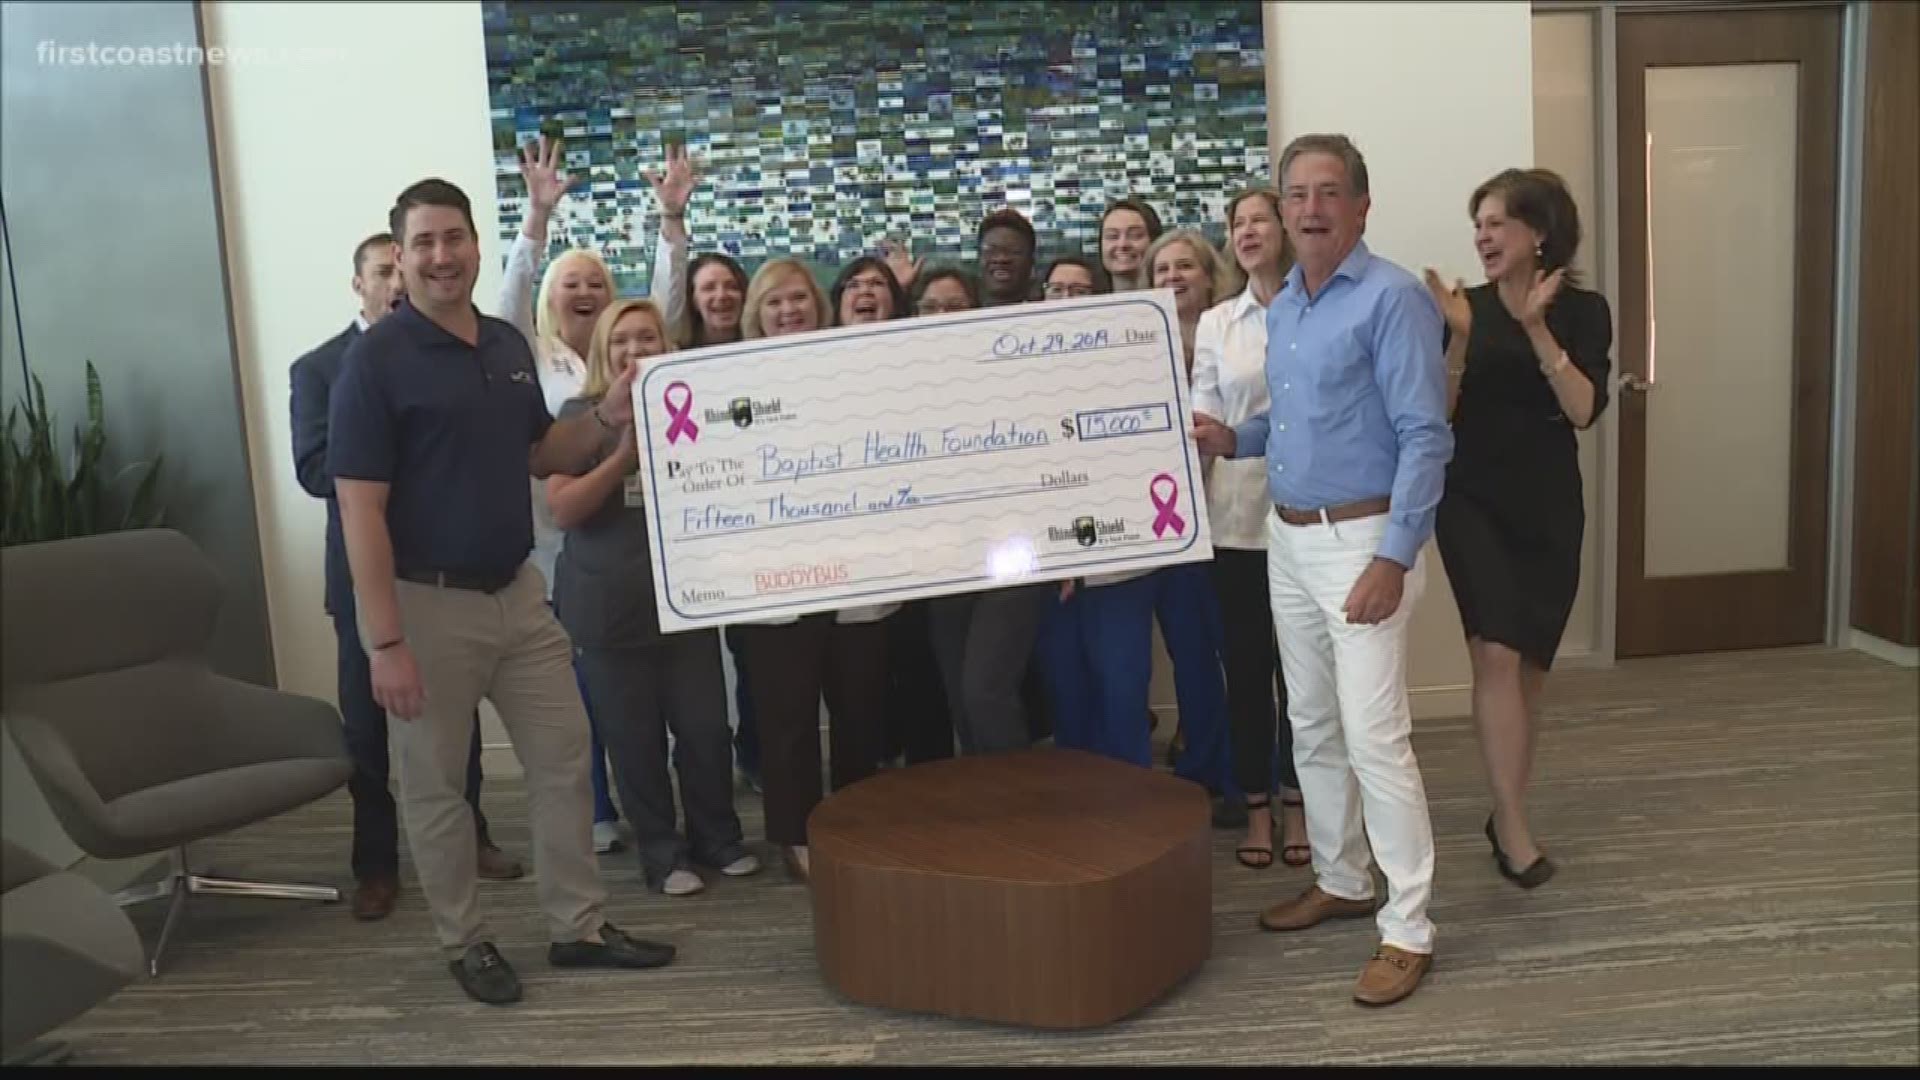 Rhino Shield stepped up in early October and promised to help raise funds to purchase the Buddy Bus, a mobile mammography unit for six local counties.